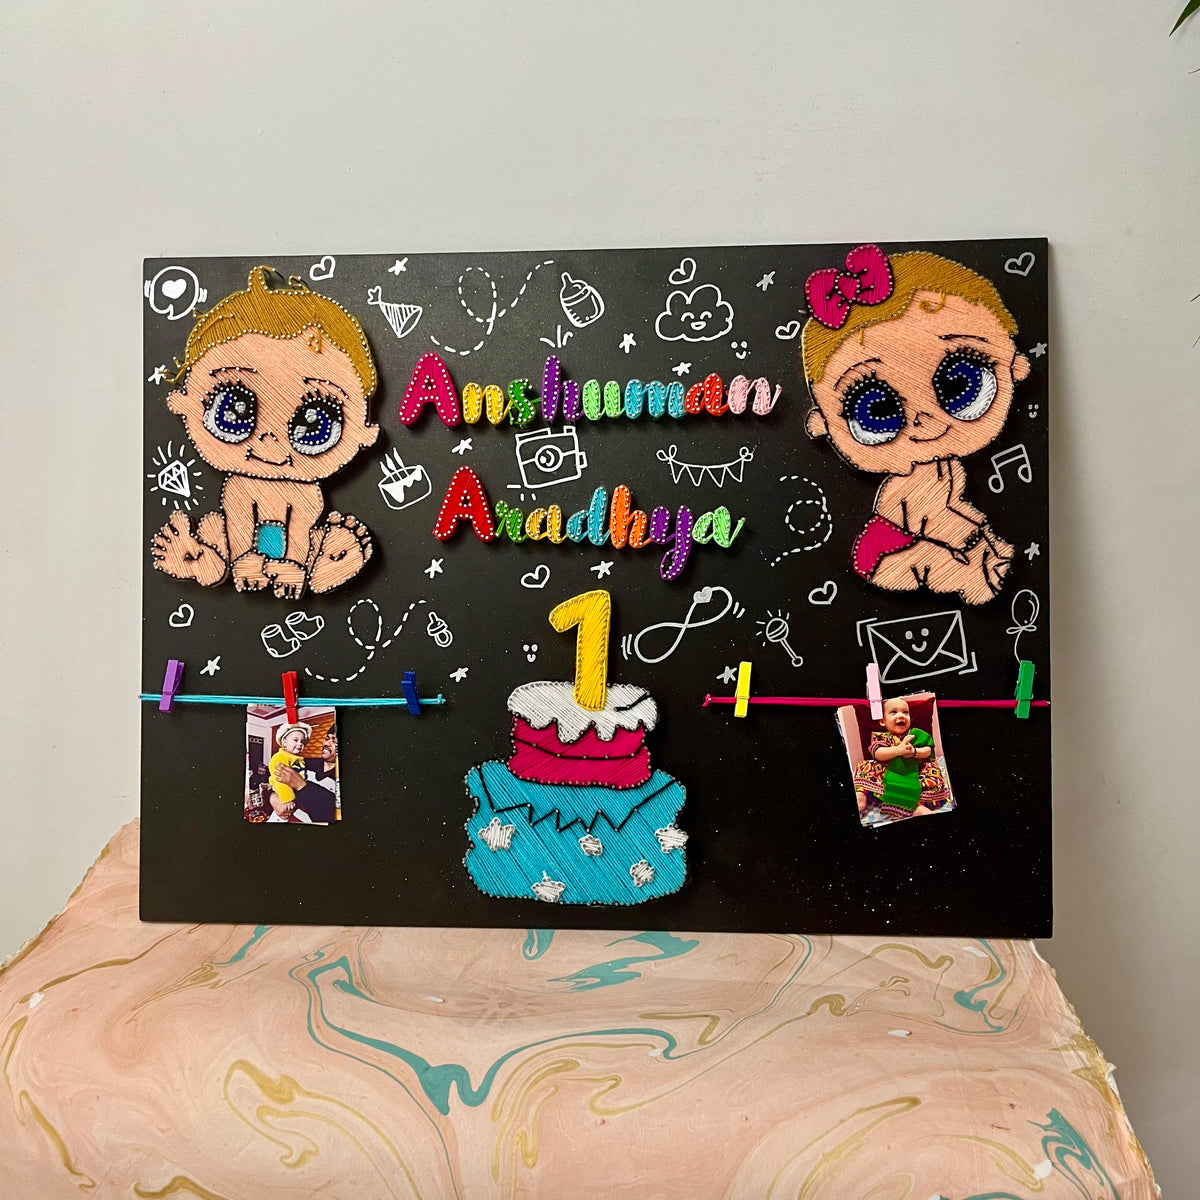 doubly blessed: twin's birthday string art